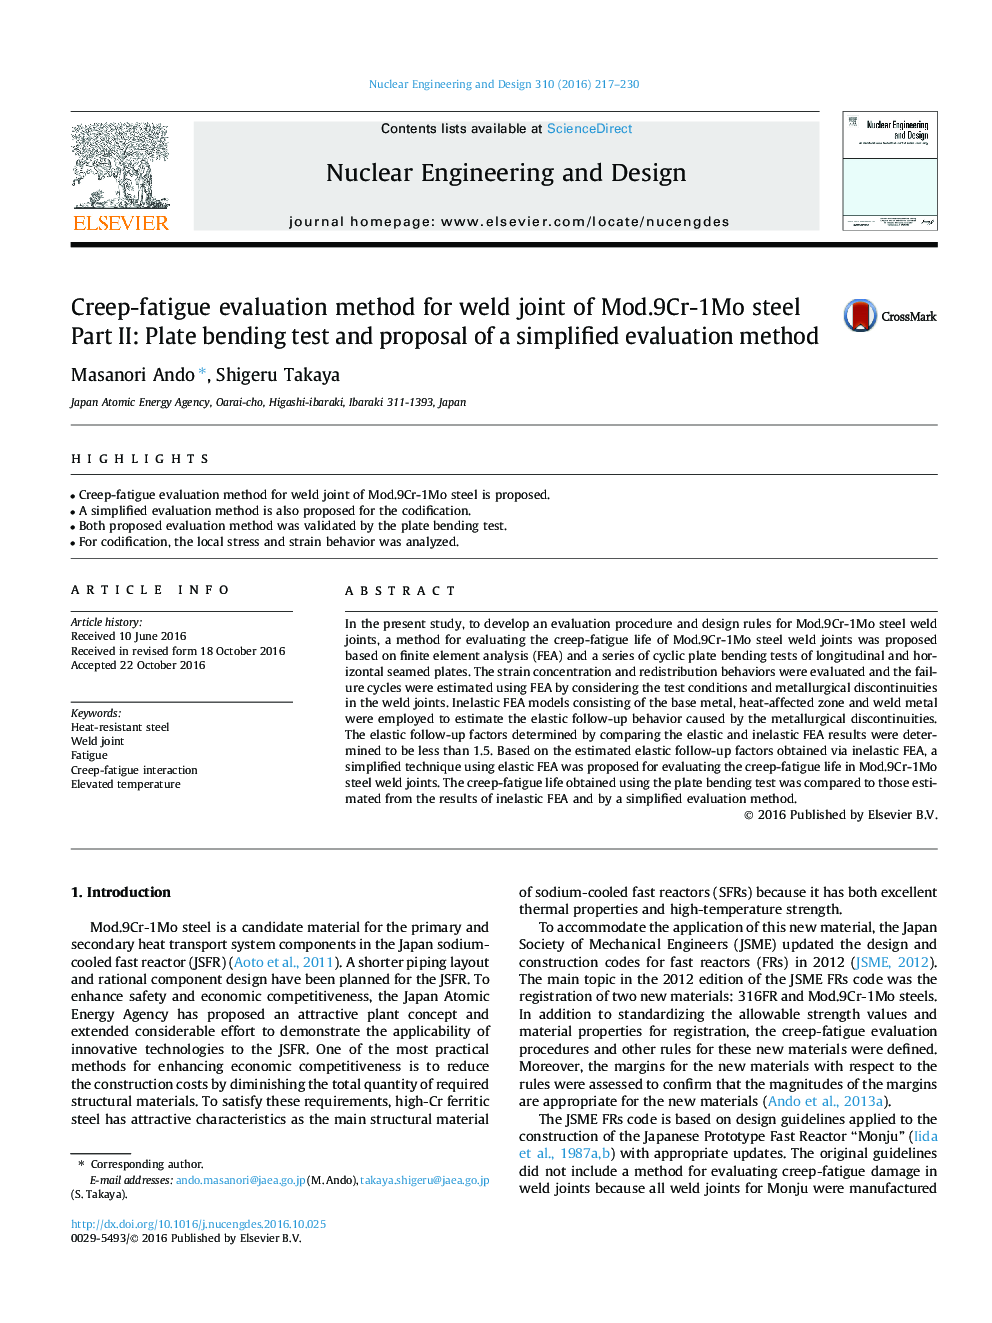 Creep-fatigue evaluation method for weld joint of Mod.9Cr-1Mo steel Part II: Plate bending test and proposal of a simplified evaluation method